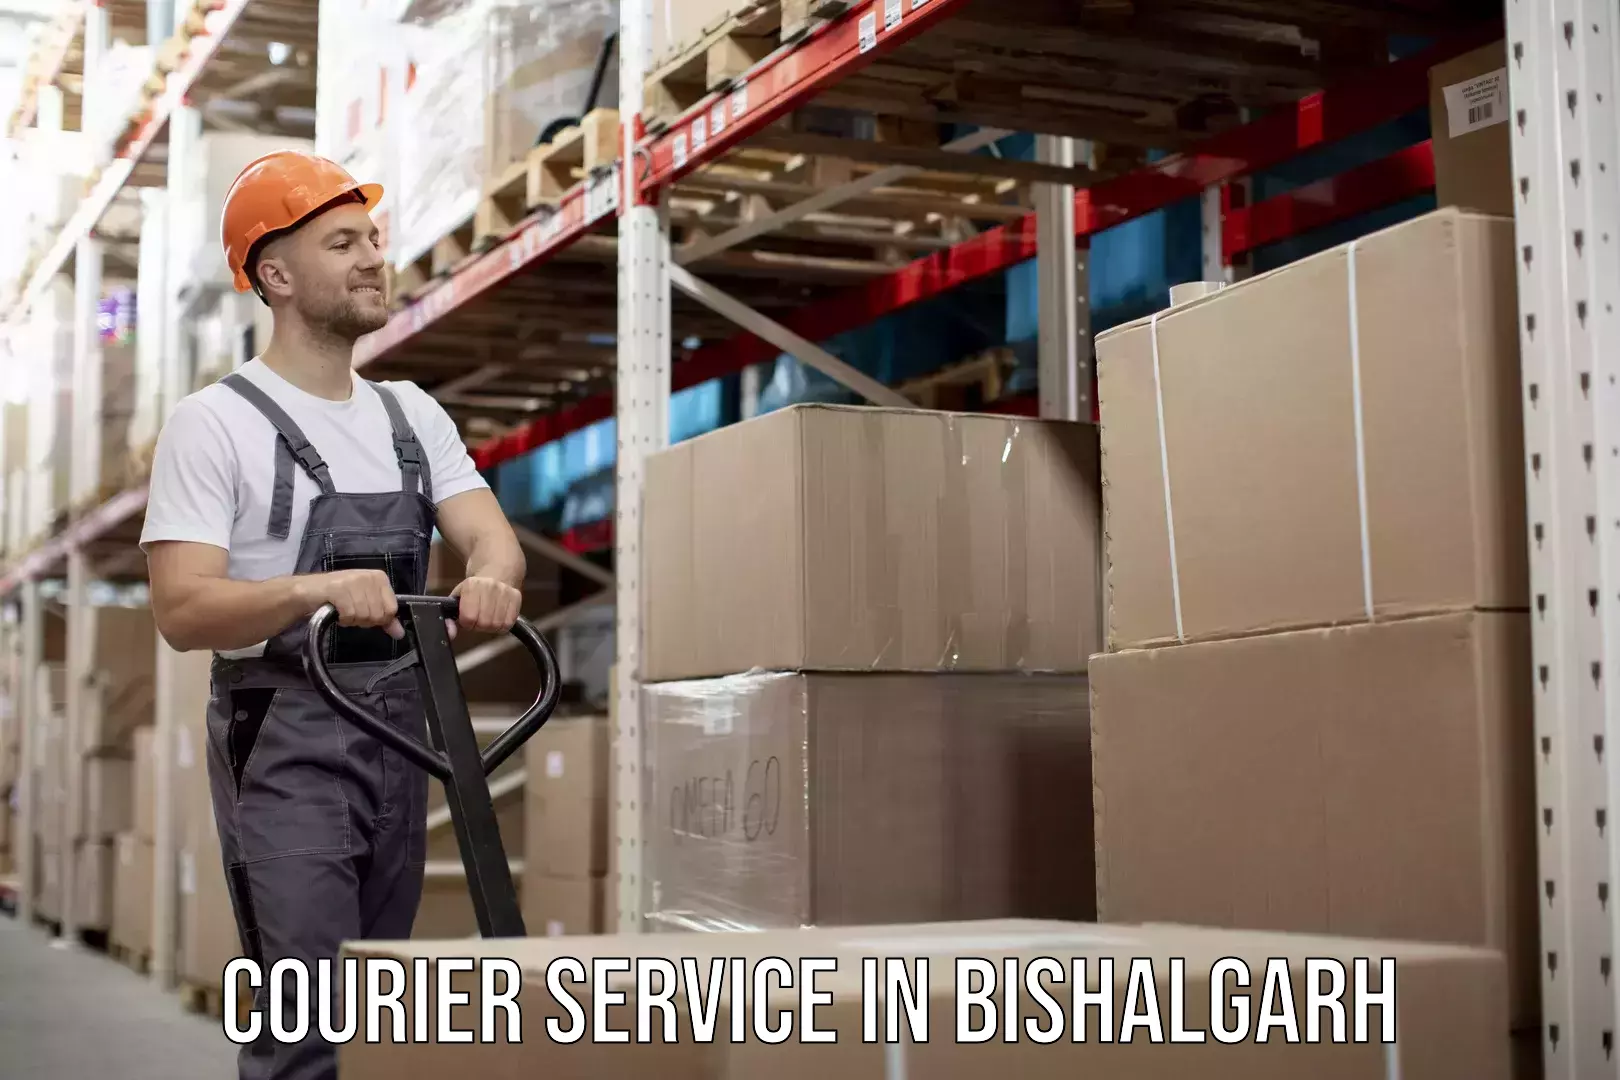 Efficient shipping operations in Bishalgarh